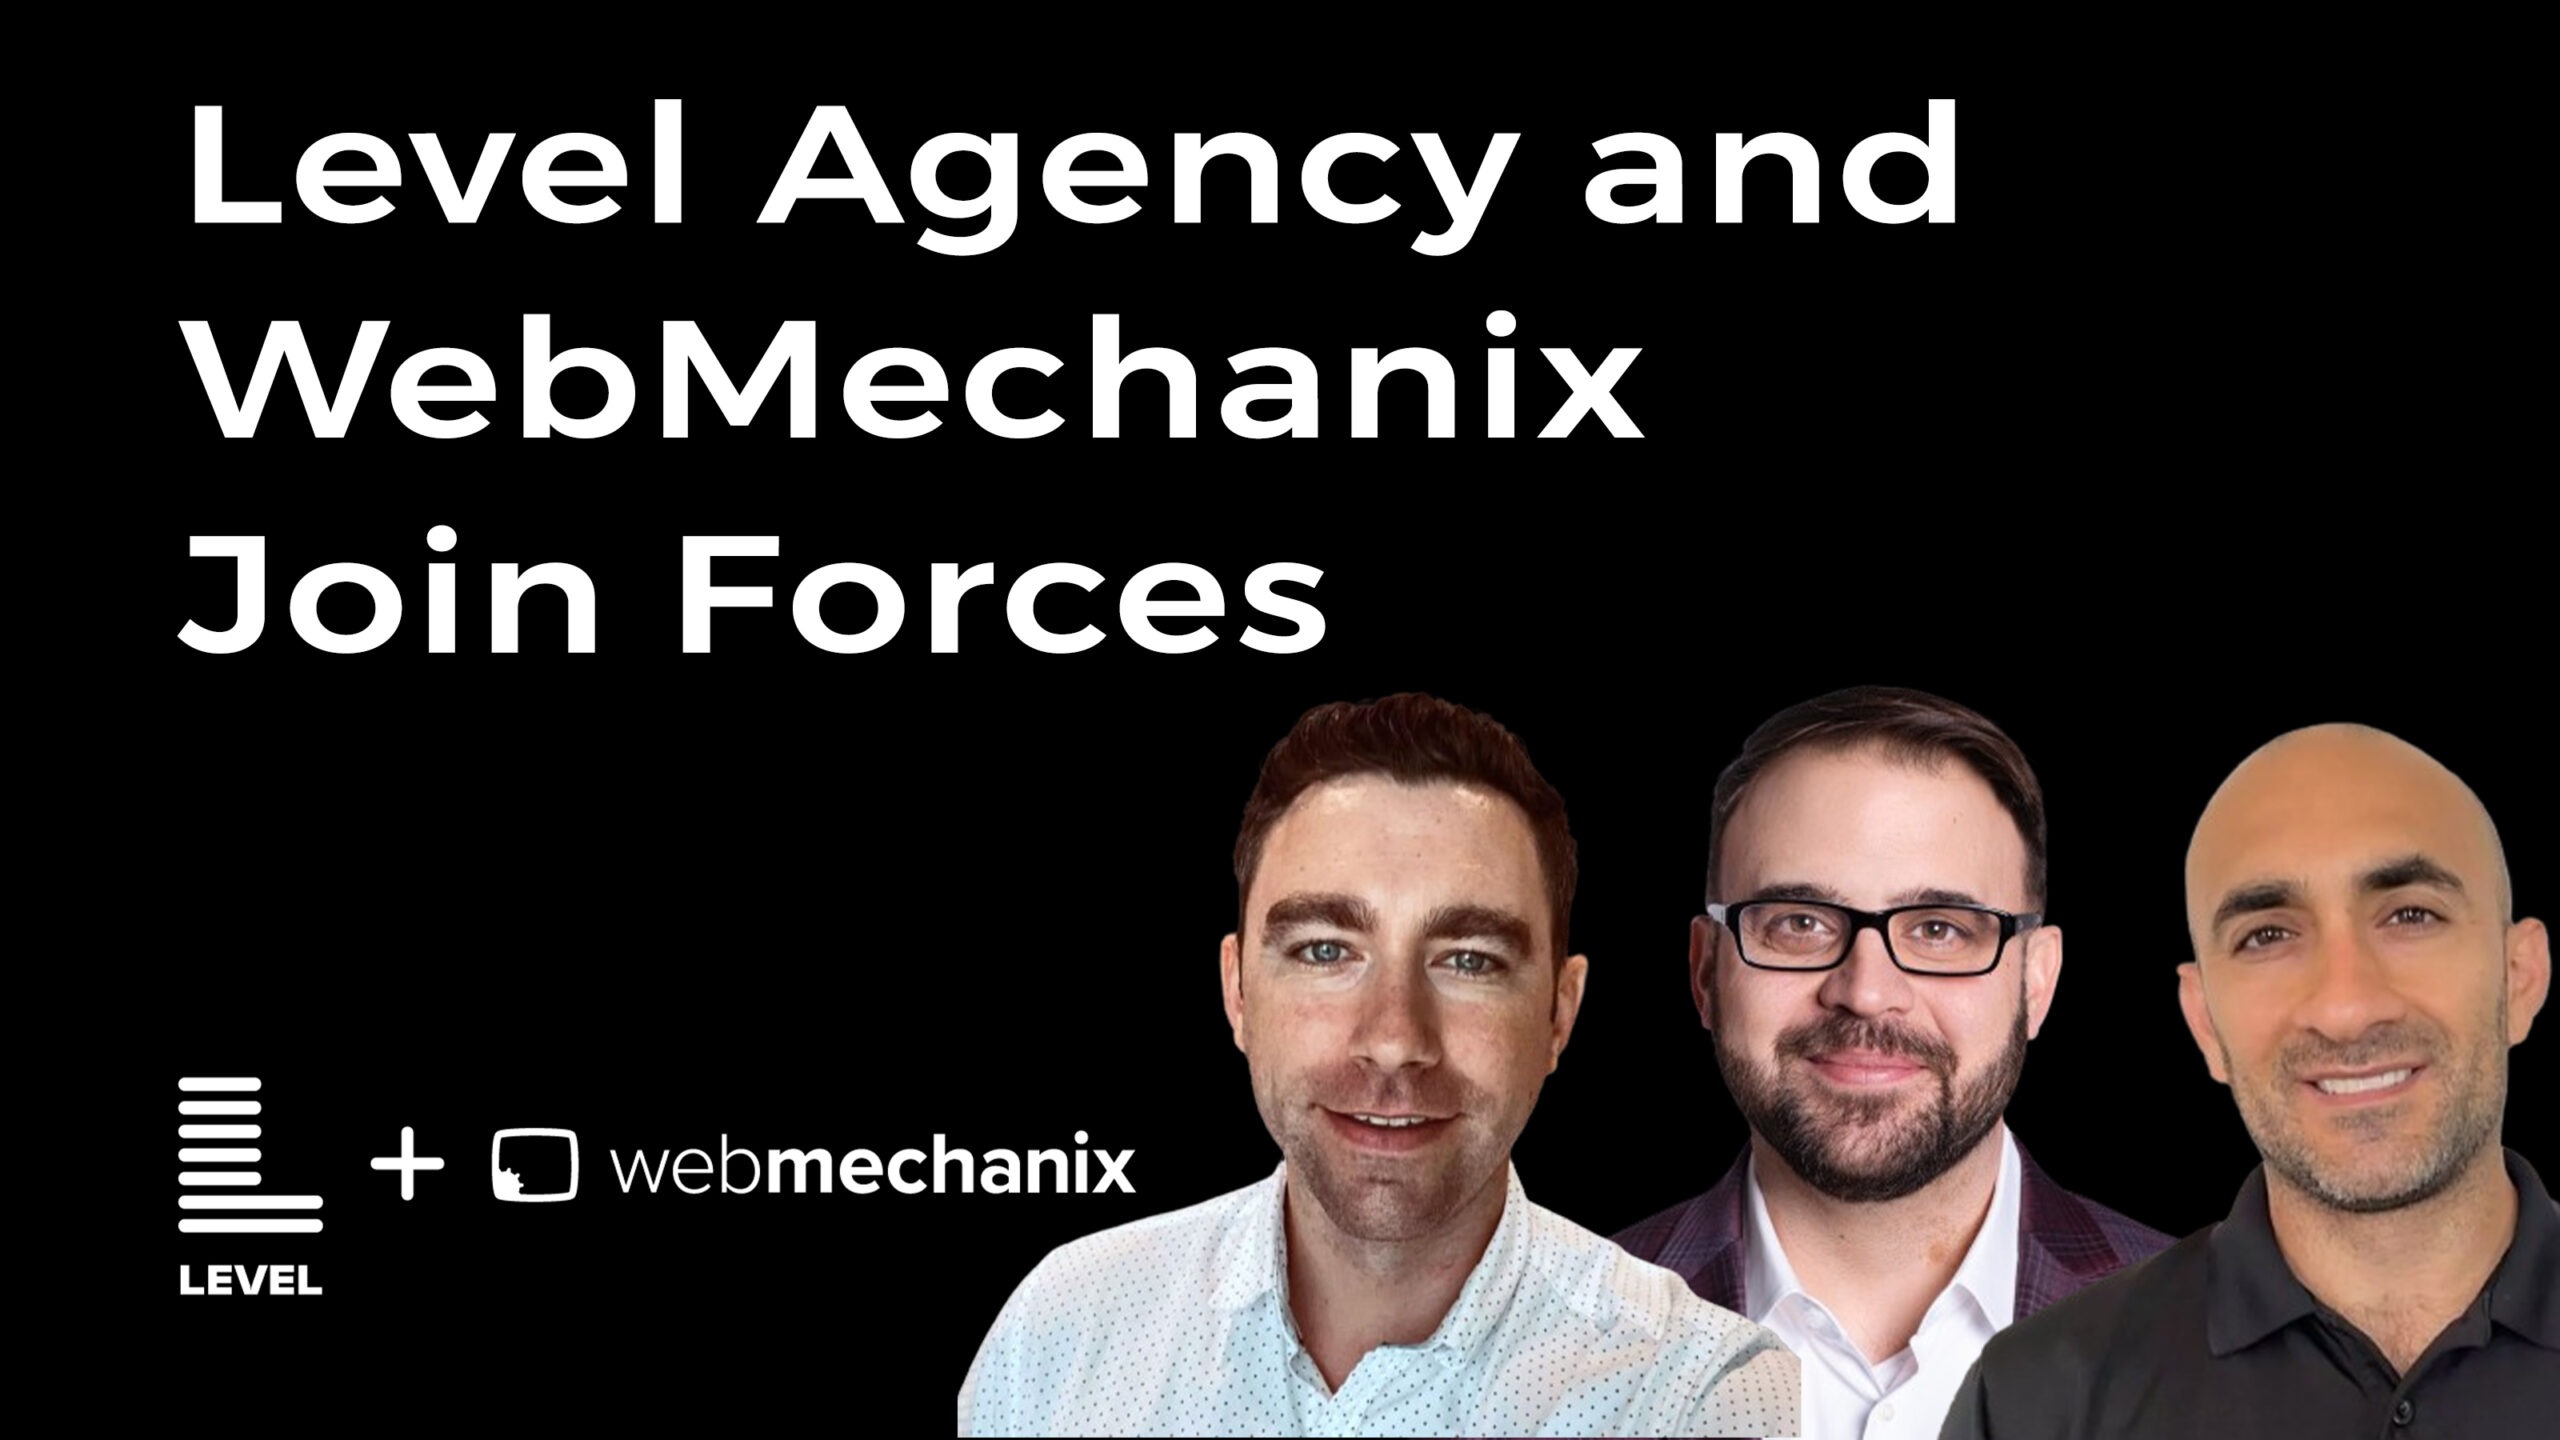 "Level Agency and WebMechanix Join Forces" featuring the headshots of Level's CEO and the cofounders of WebMechanix.